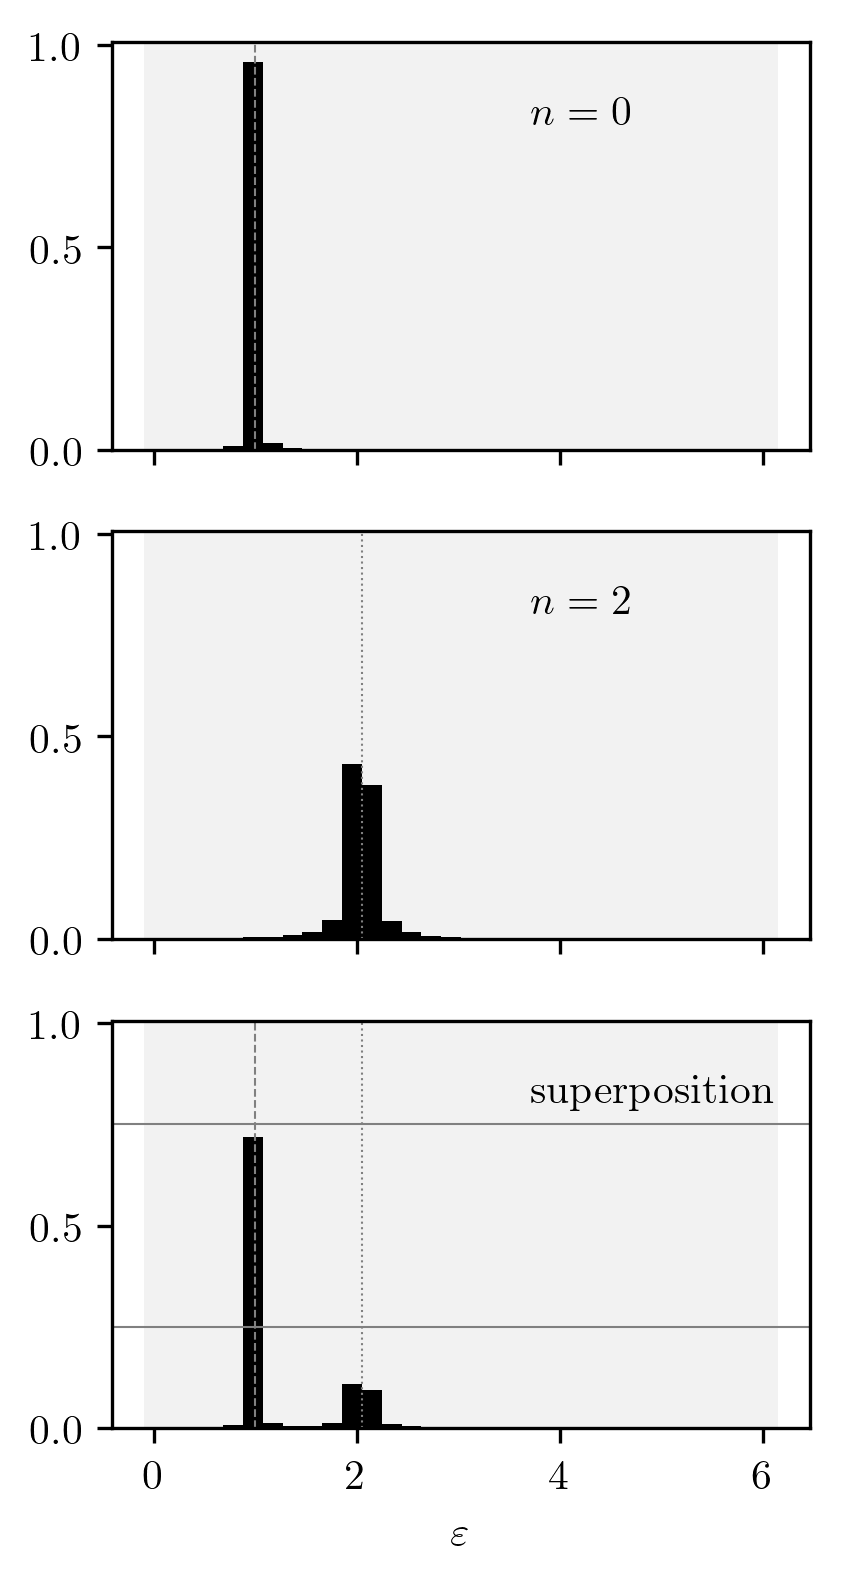 Probability distribution for a superposition of states